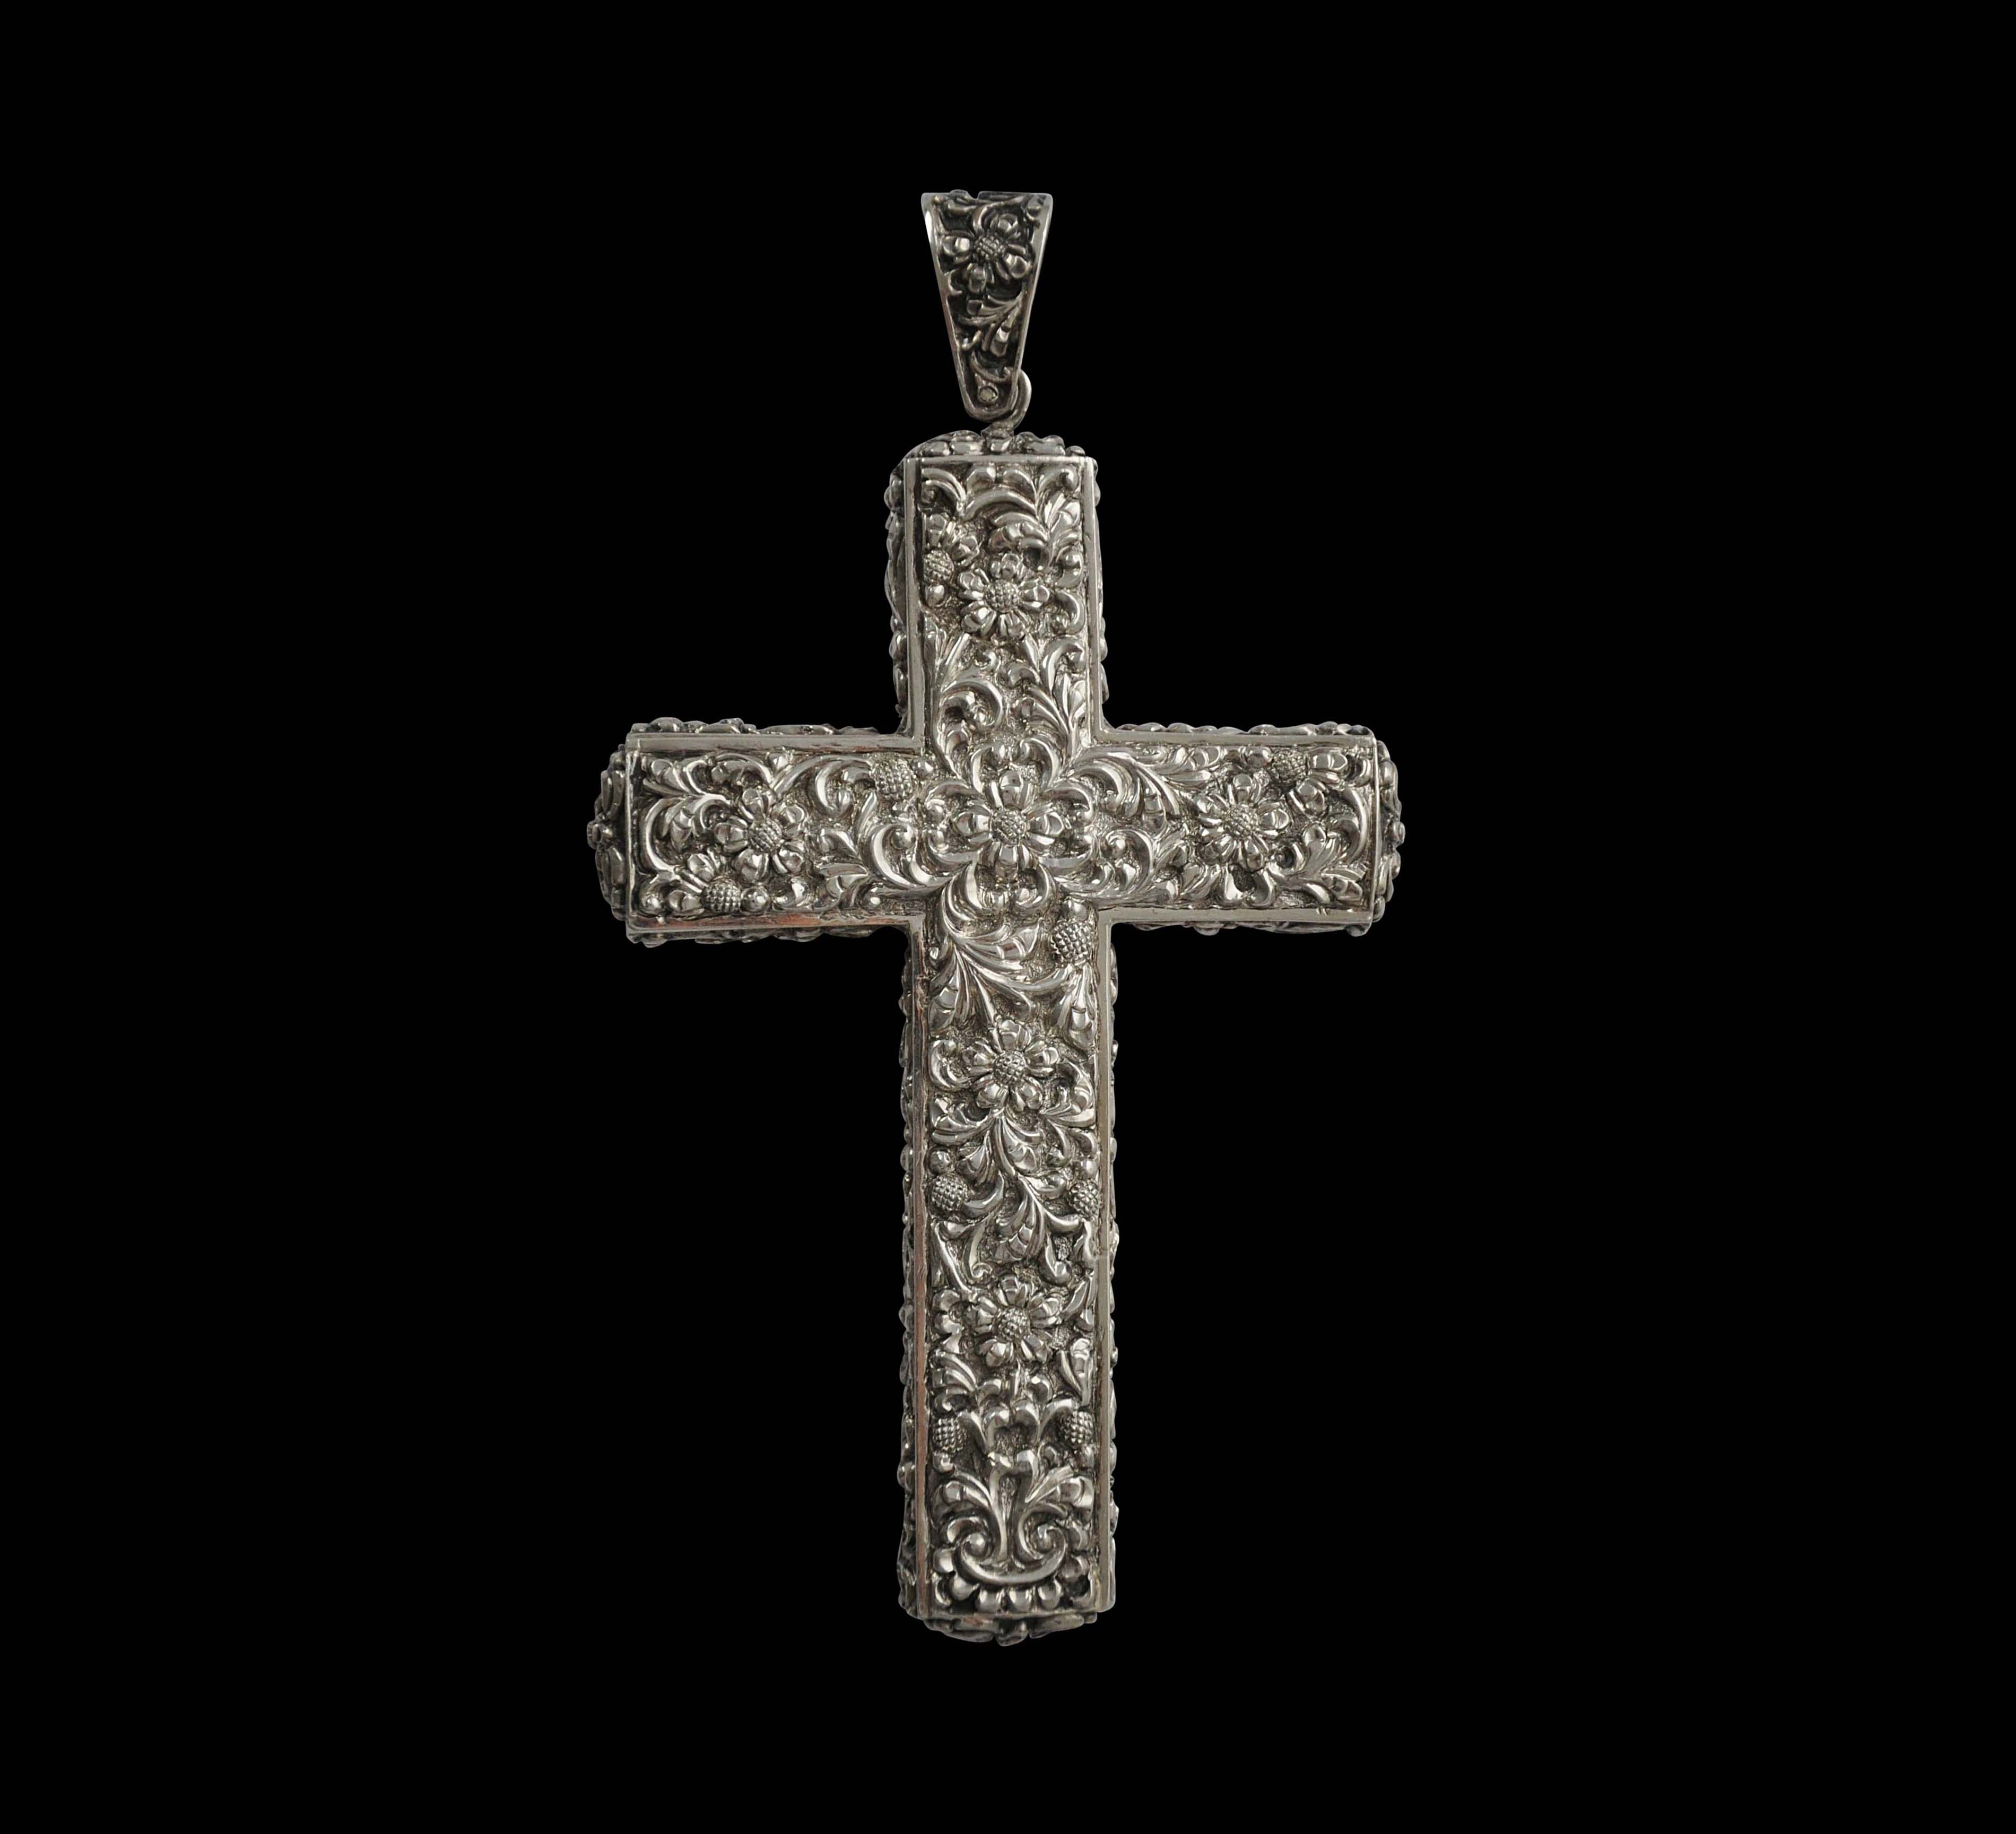 Unusually Large Chased Silver Christian Cross - Michael Backman Ltd